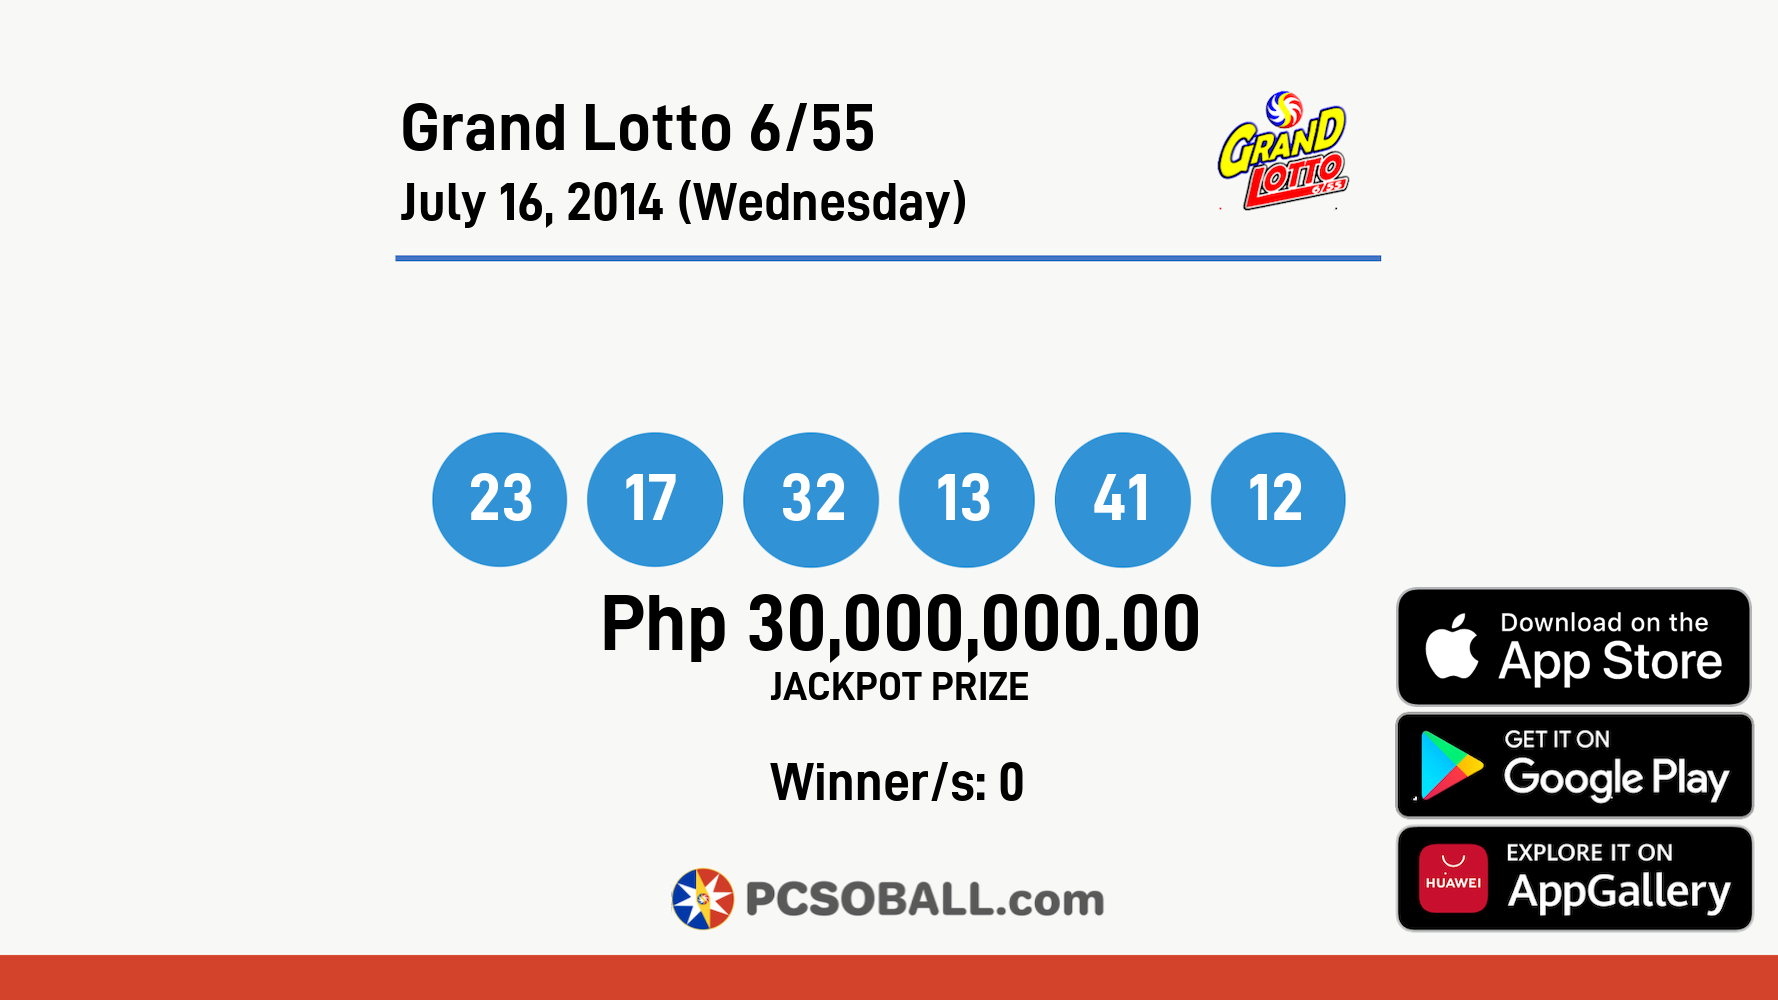 Grand Lotto 6/55 July 16, 2014 (Wednesday) Result